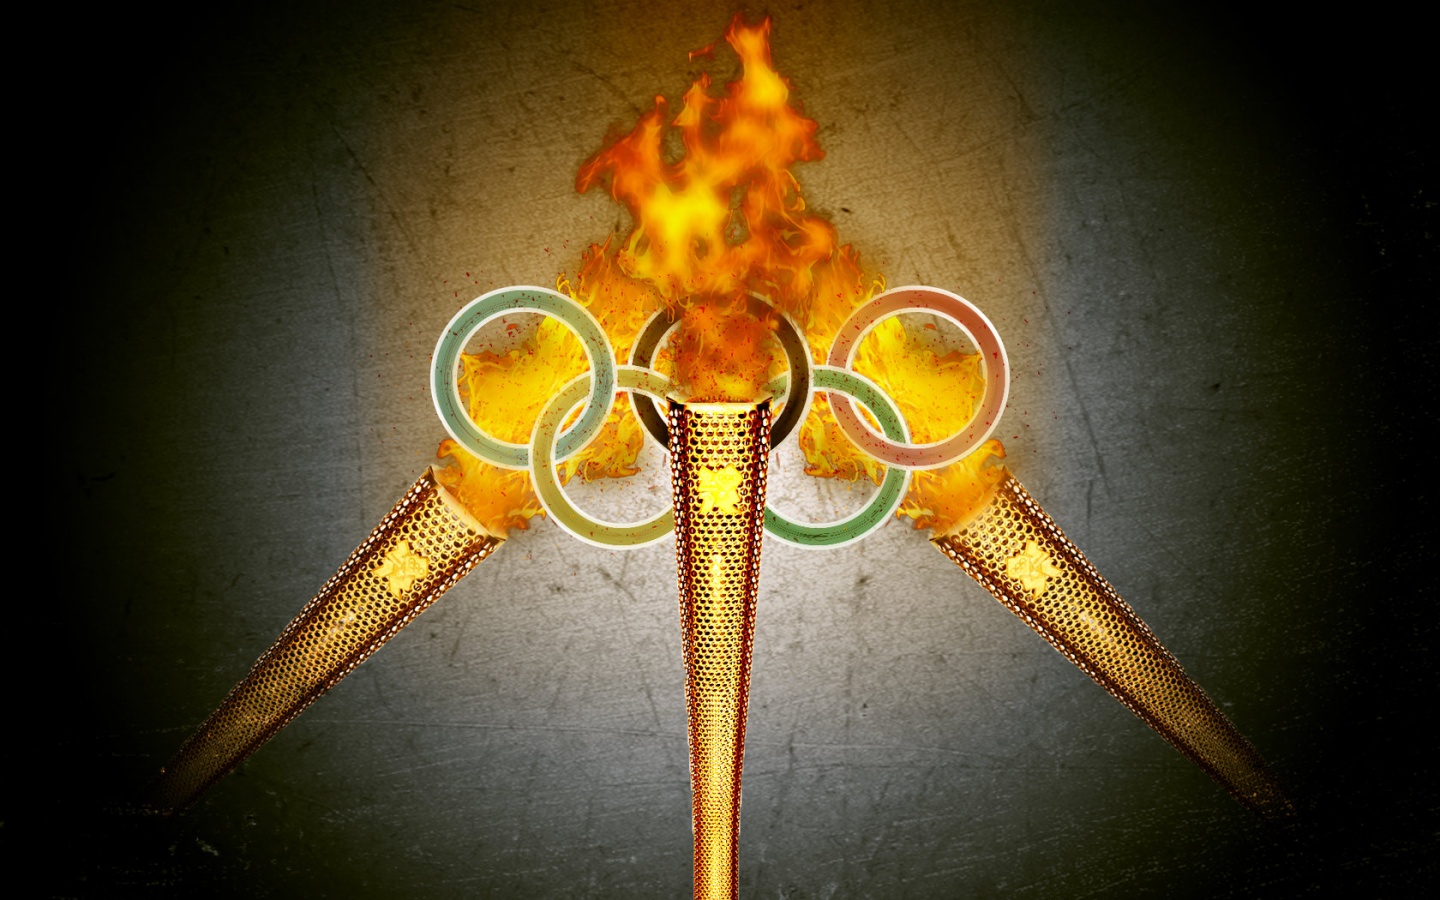 Olympic Torches Windows 8 Wallpaper | Windows 8 Torch Flames ...